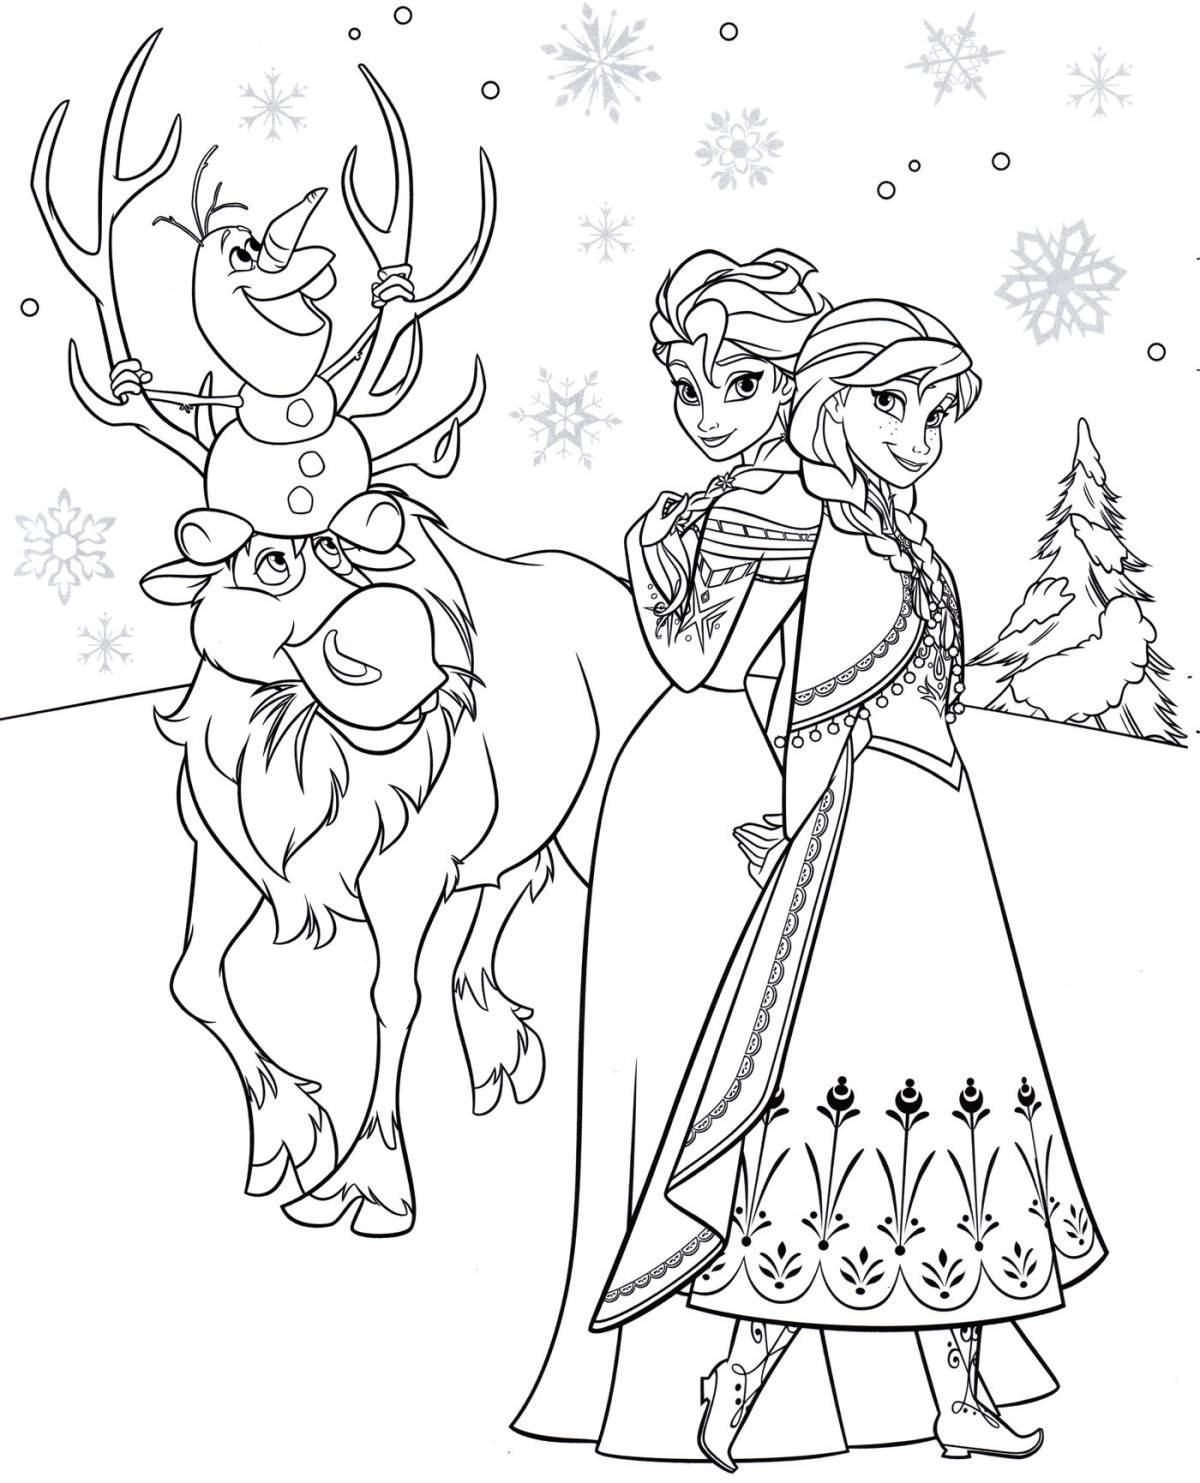 Amazing Elsa and Anna coloring book for kids